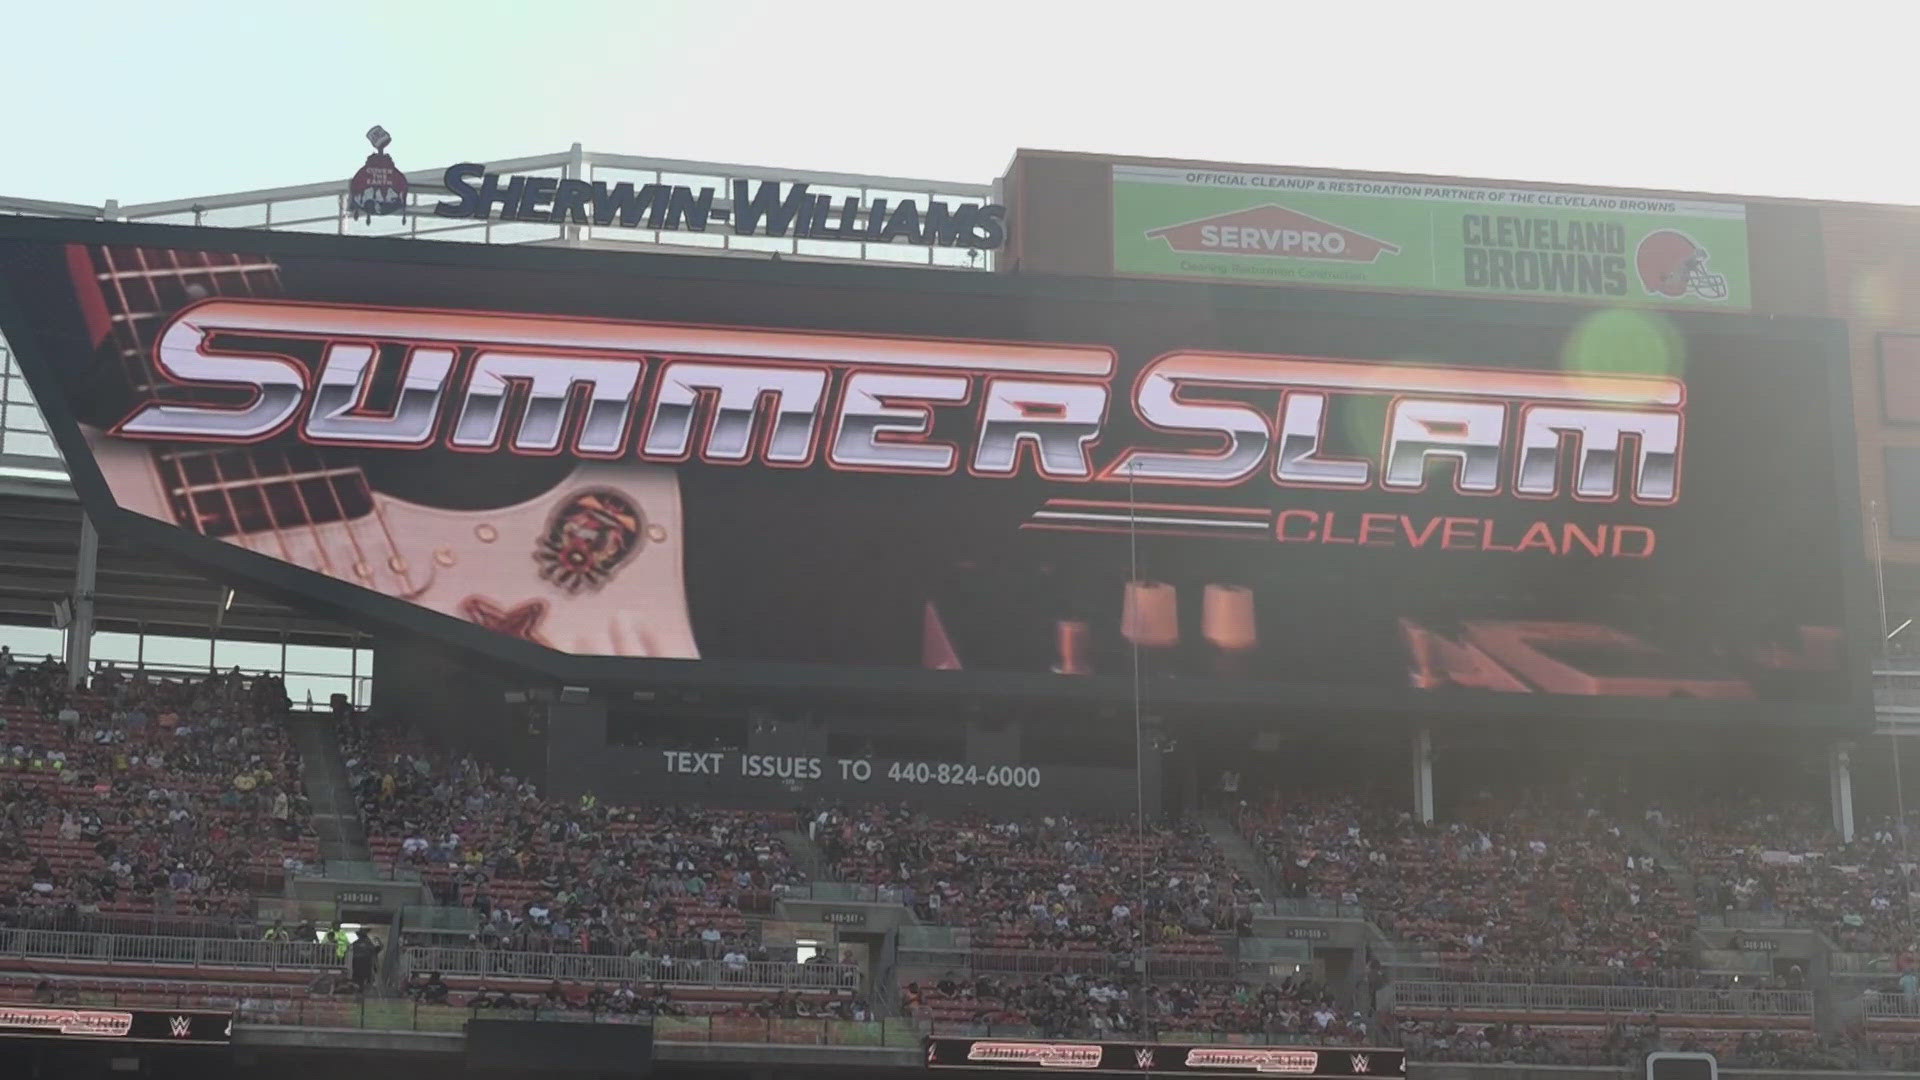 WWE SummerSlam capped off an exciting night of events in downtown Cleveland